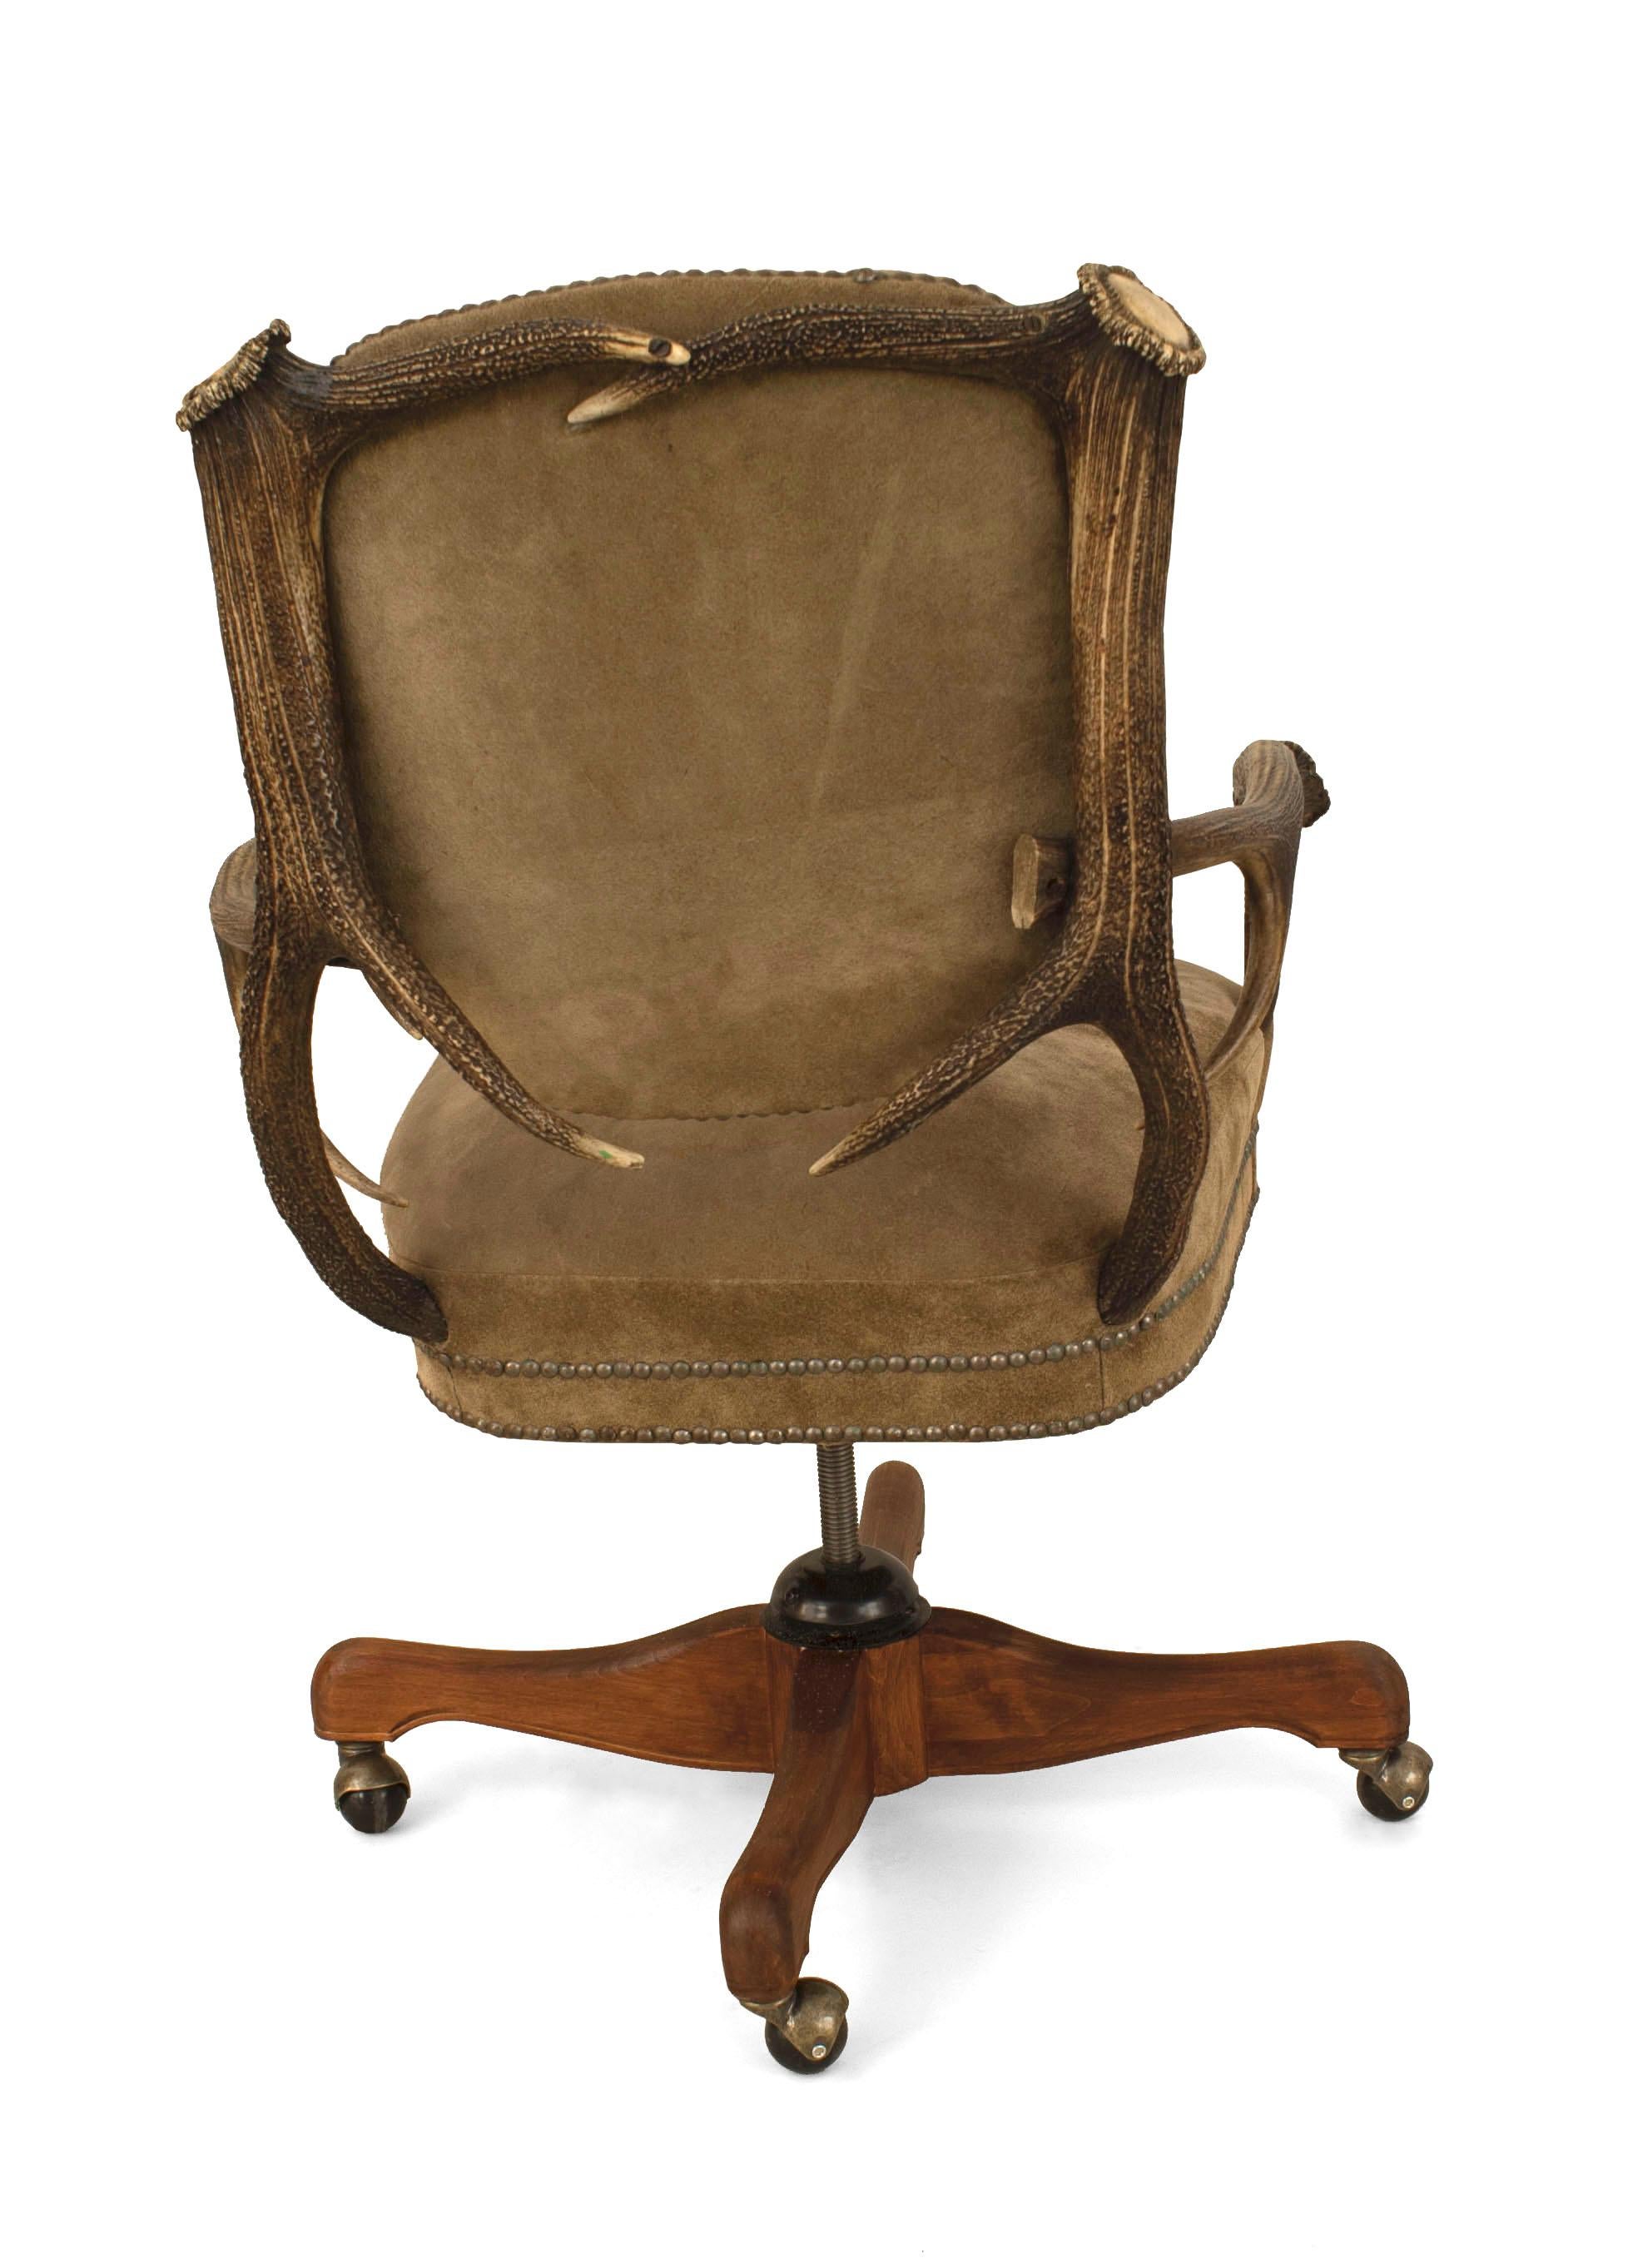 19th Century Rustic German Horn and Antler Swivel Chair For Sale